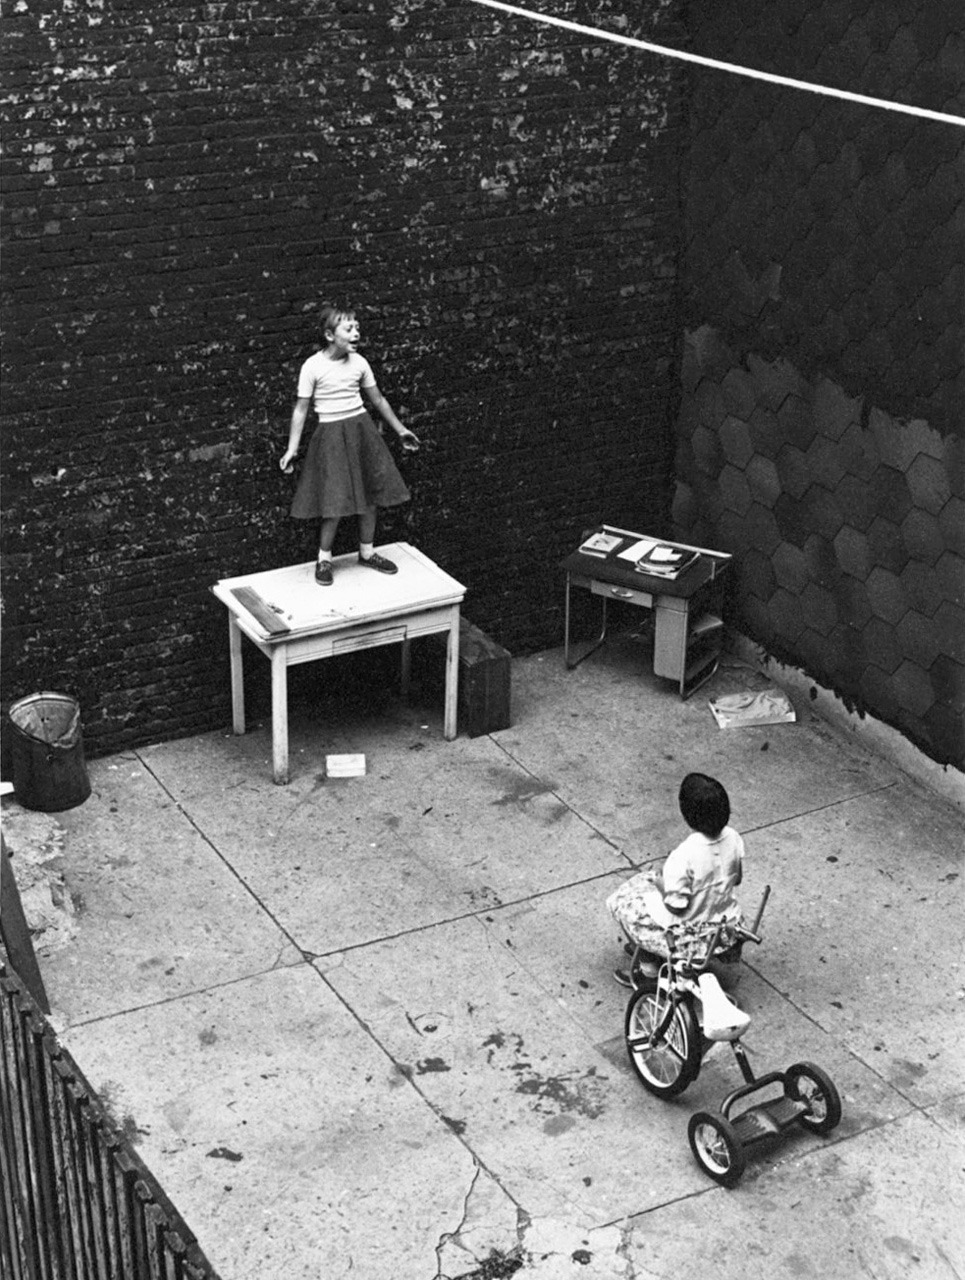 William Gedney
Girl standing on desk in courtyard, performing for a seated girl, 1955
Thanks to wonderfulambiguity